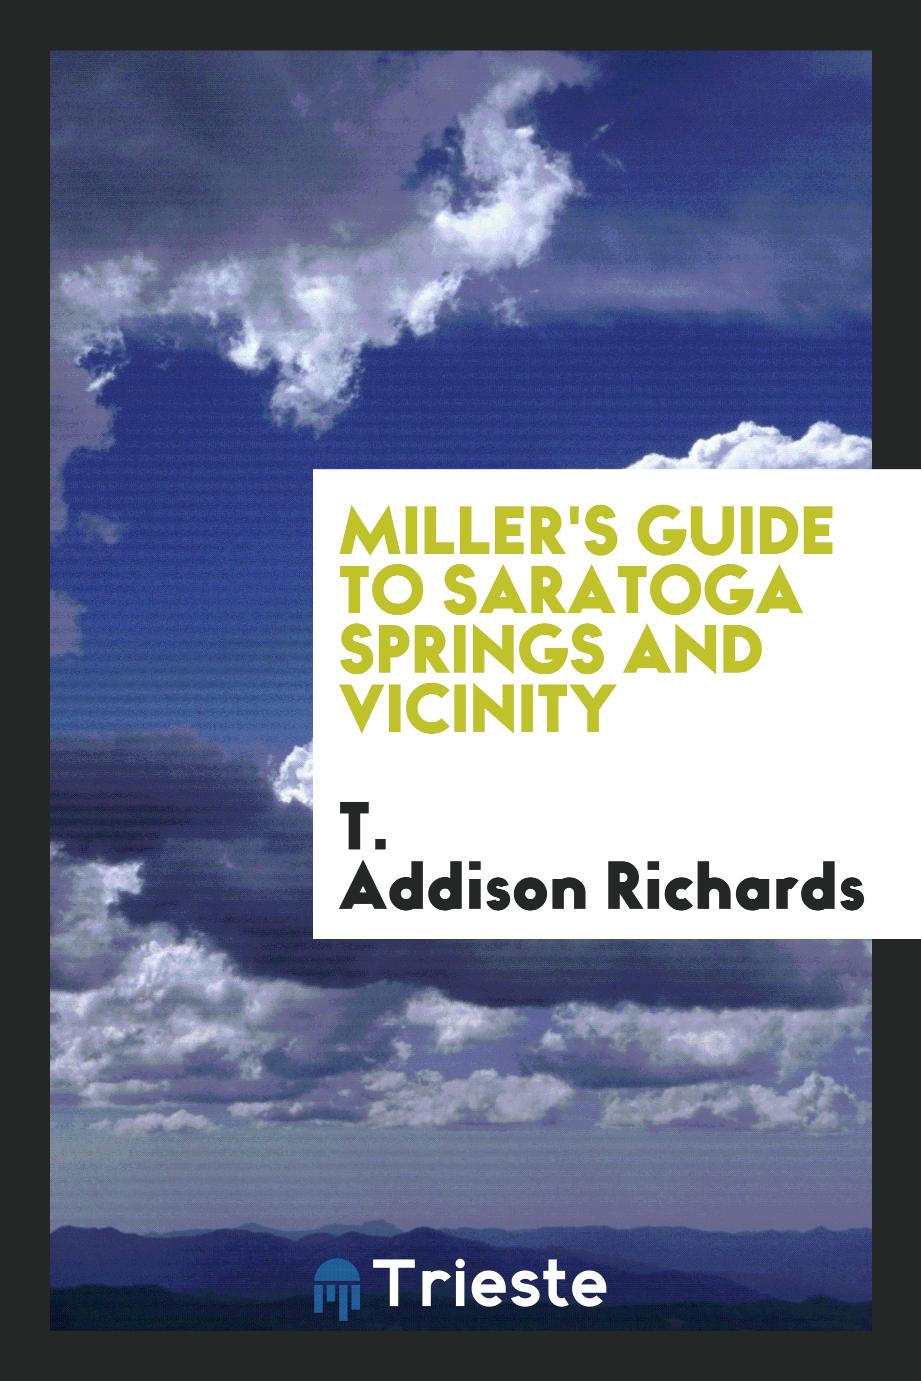 Miller's guide to Saratoga Springs and vicinity